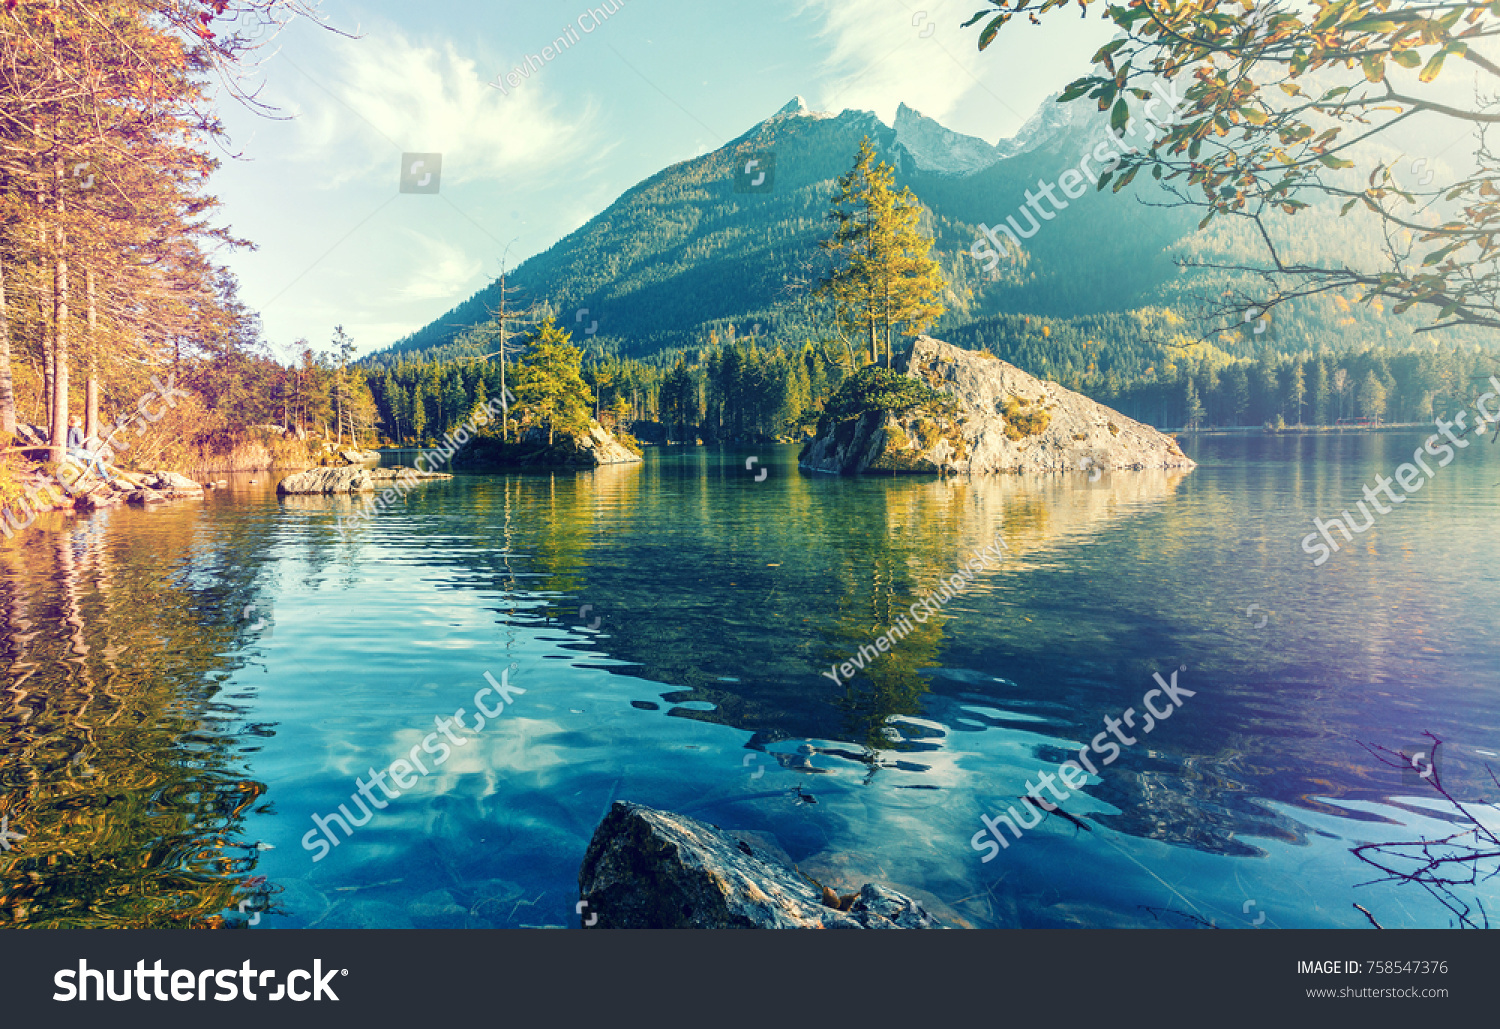 Wonderful nature scene, pine trees on a rock island at sunset, glowing in sunlight, The  Lake Hintersee. Nationalpark Berchtesgadener Land, Upper Bavaria, Germany.  retro style, instagram filter,  #758547376